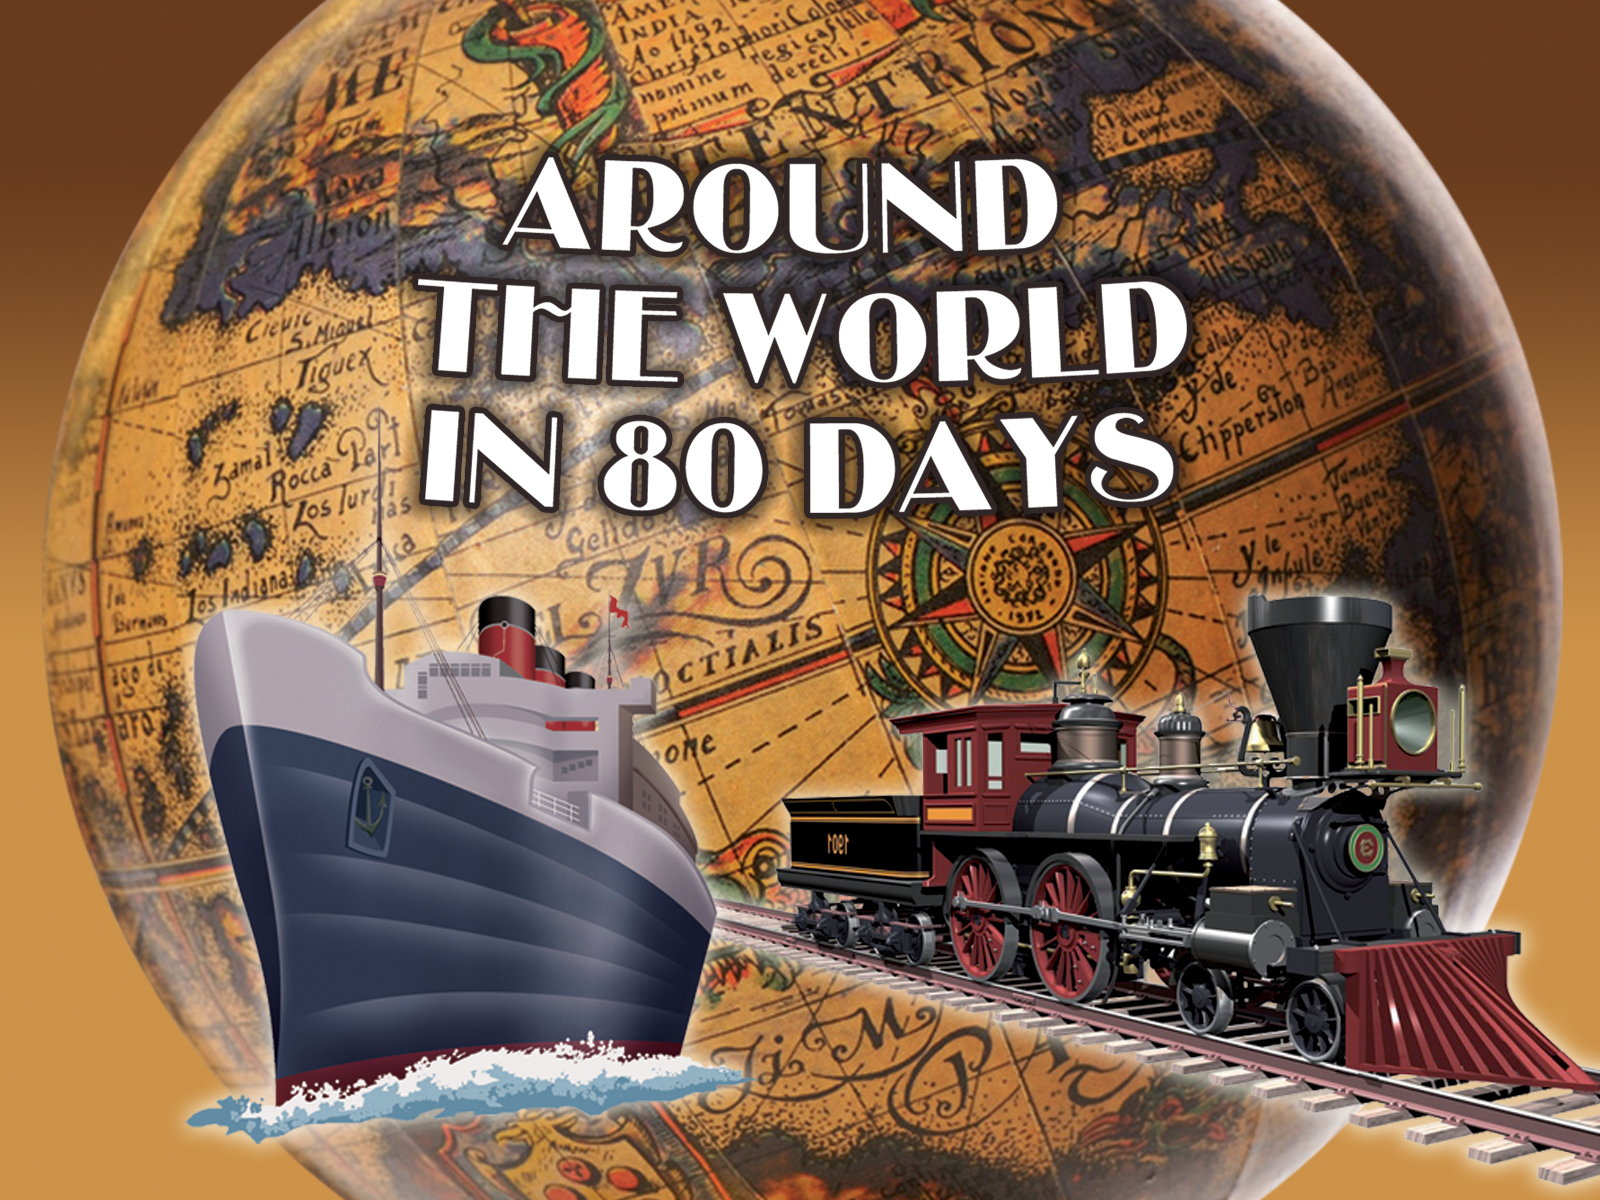 travelling the world in 80 days